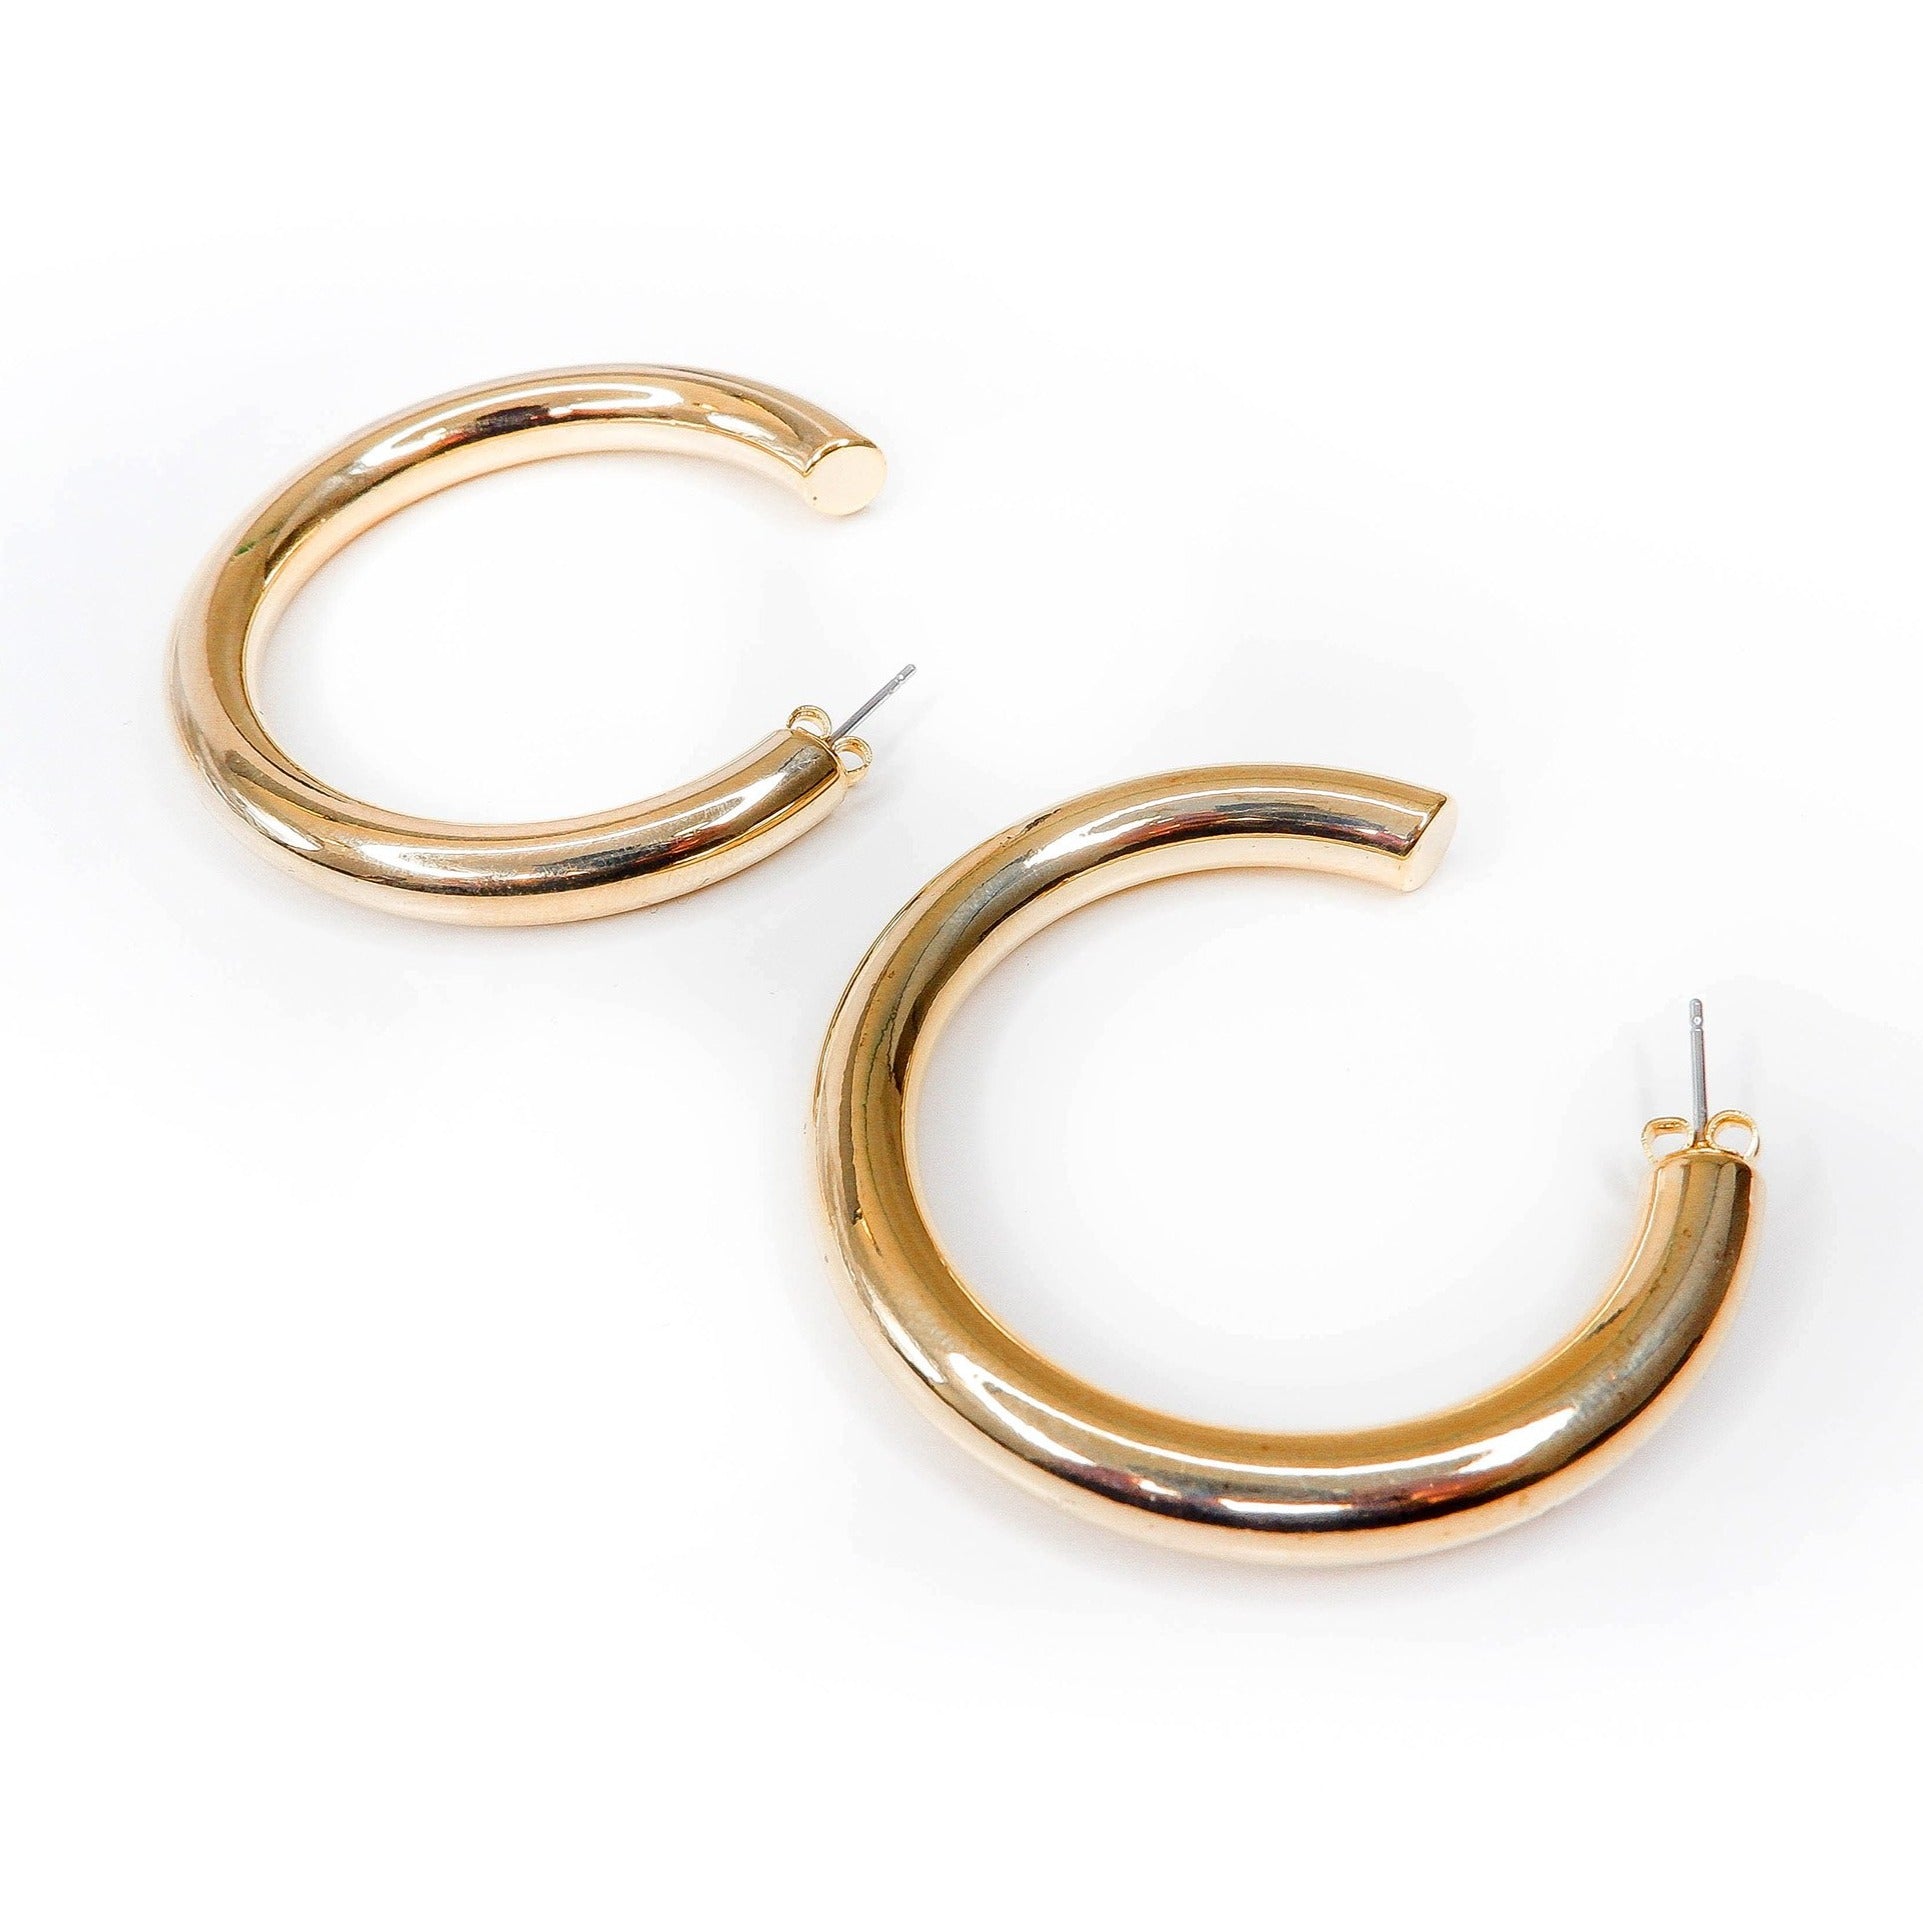 Thick 14k gold plated hoops 